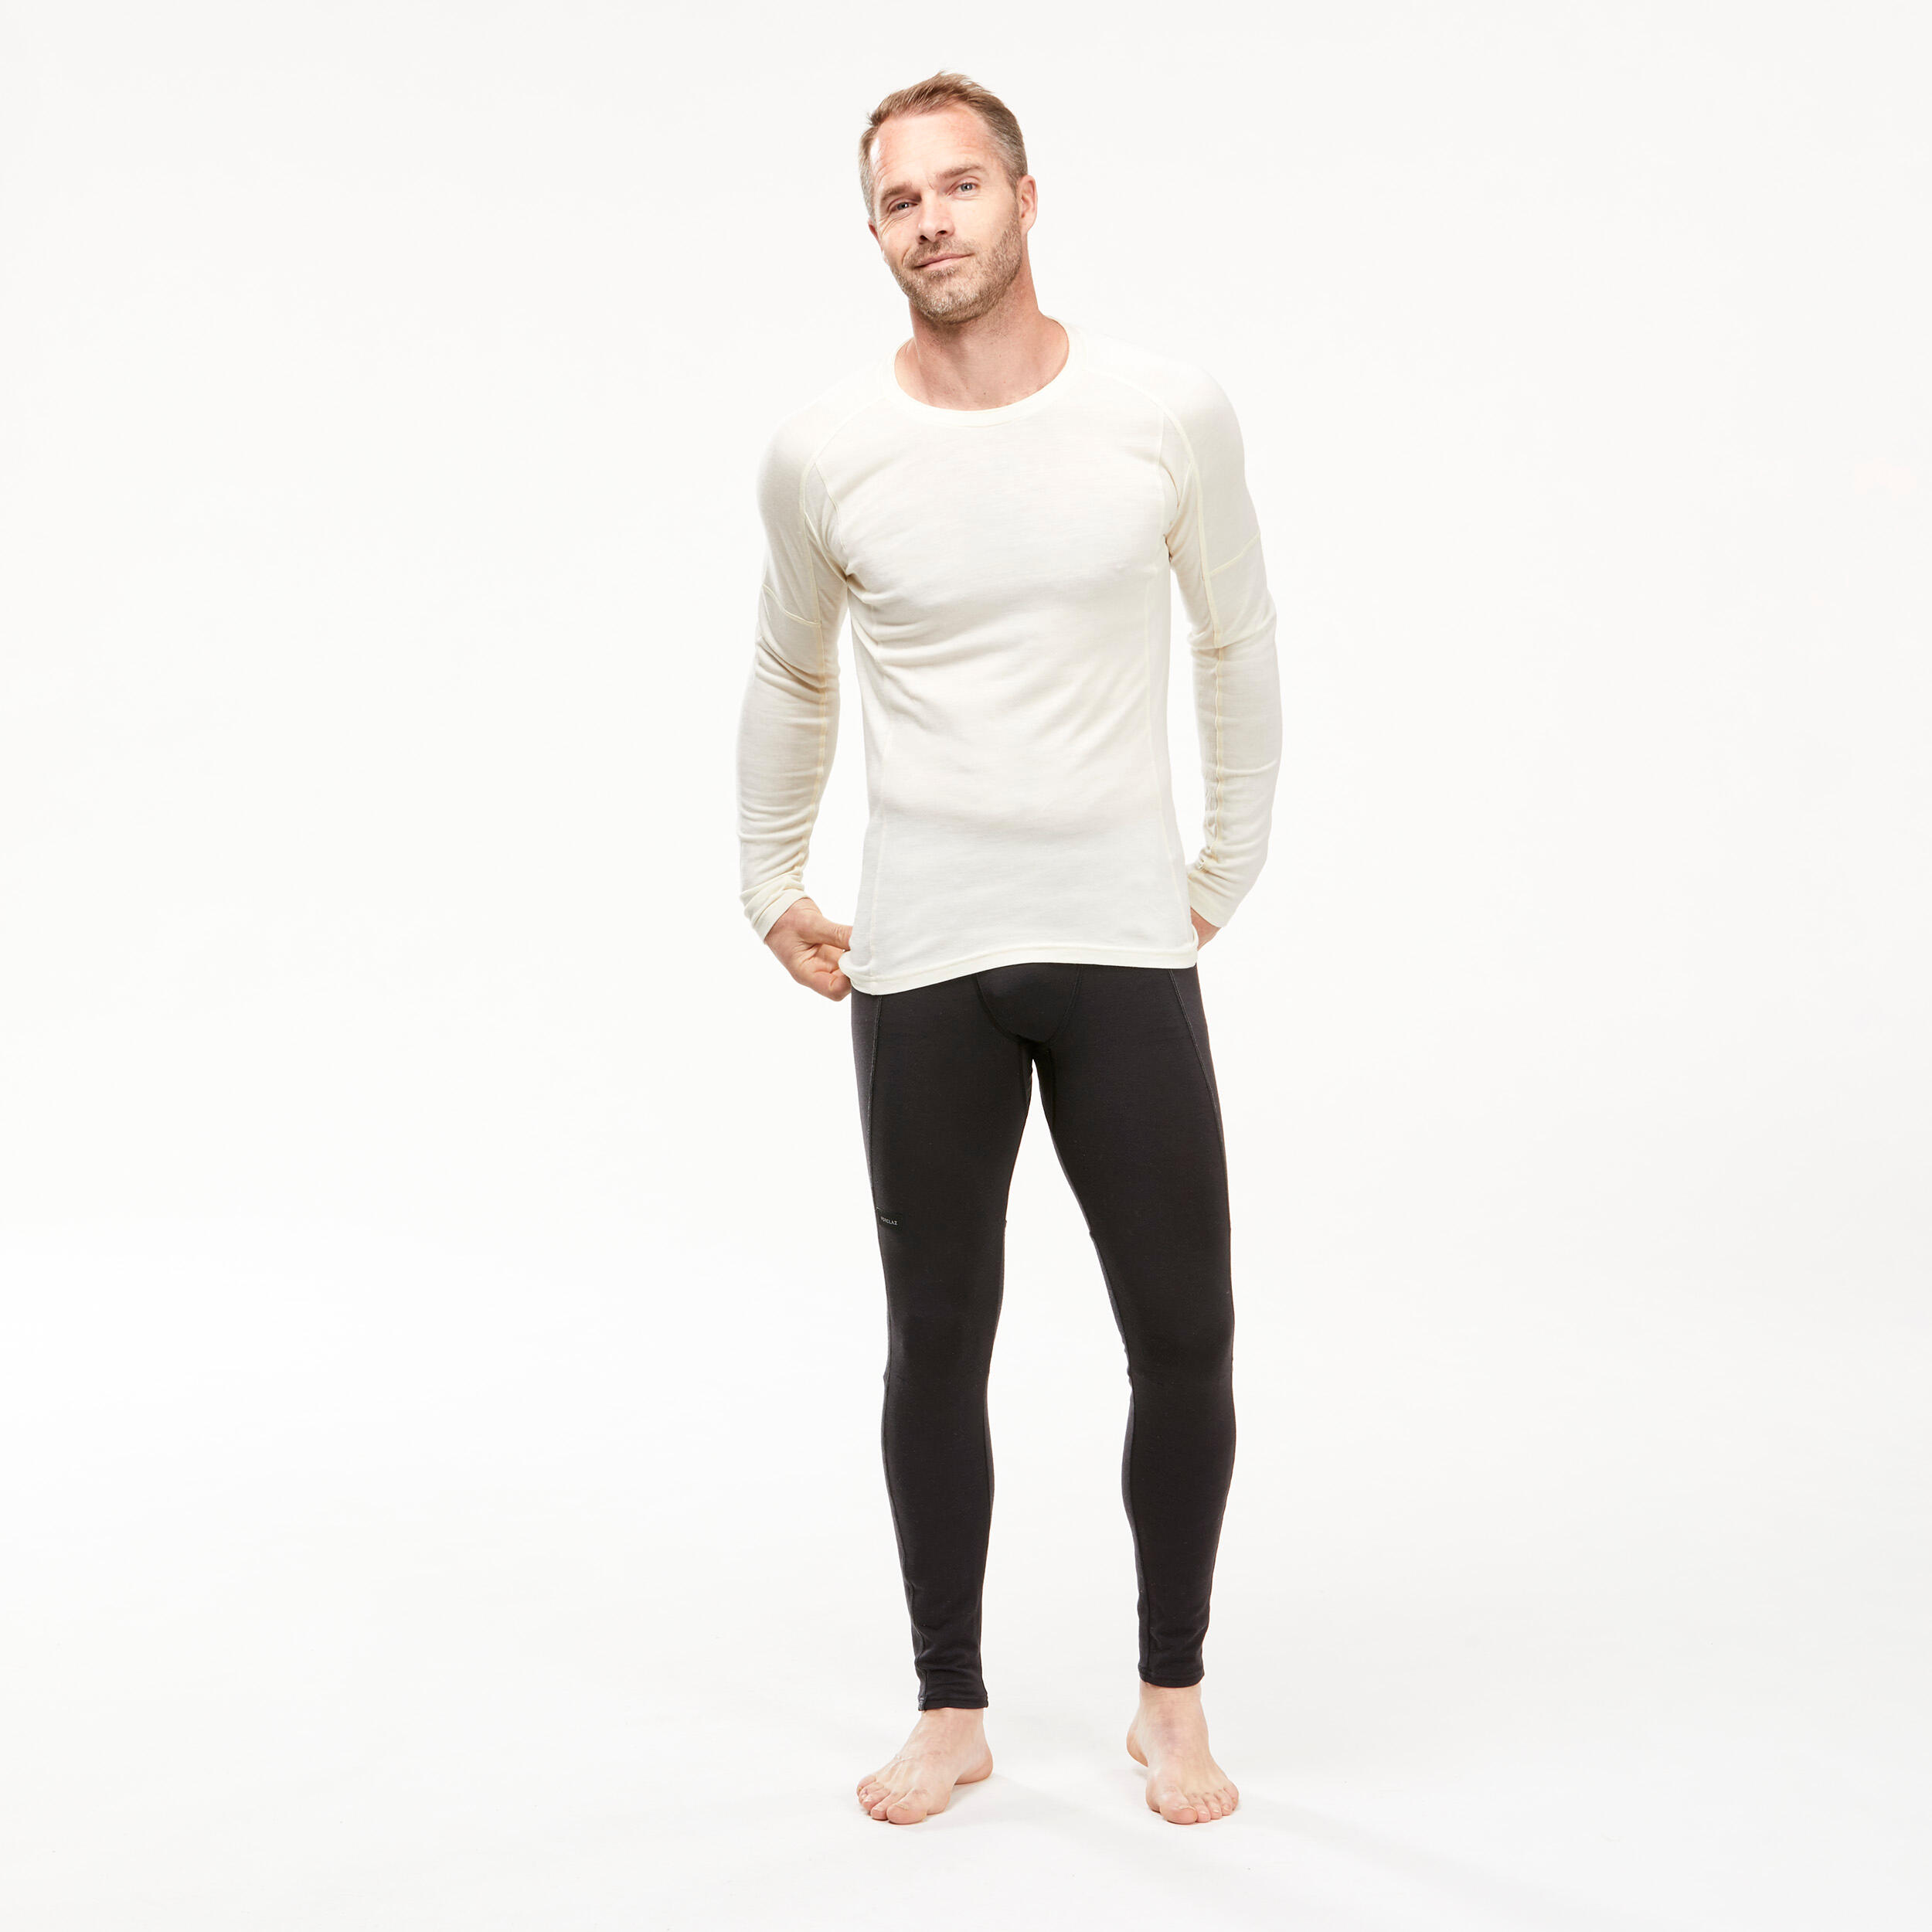 CozeCore Base Layer Long-Sleeve T-Shirt & Base Layer Tights Set for Men